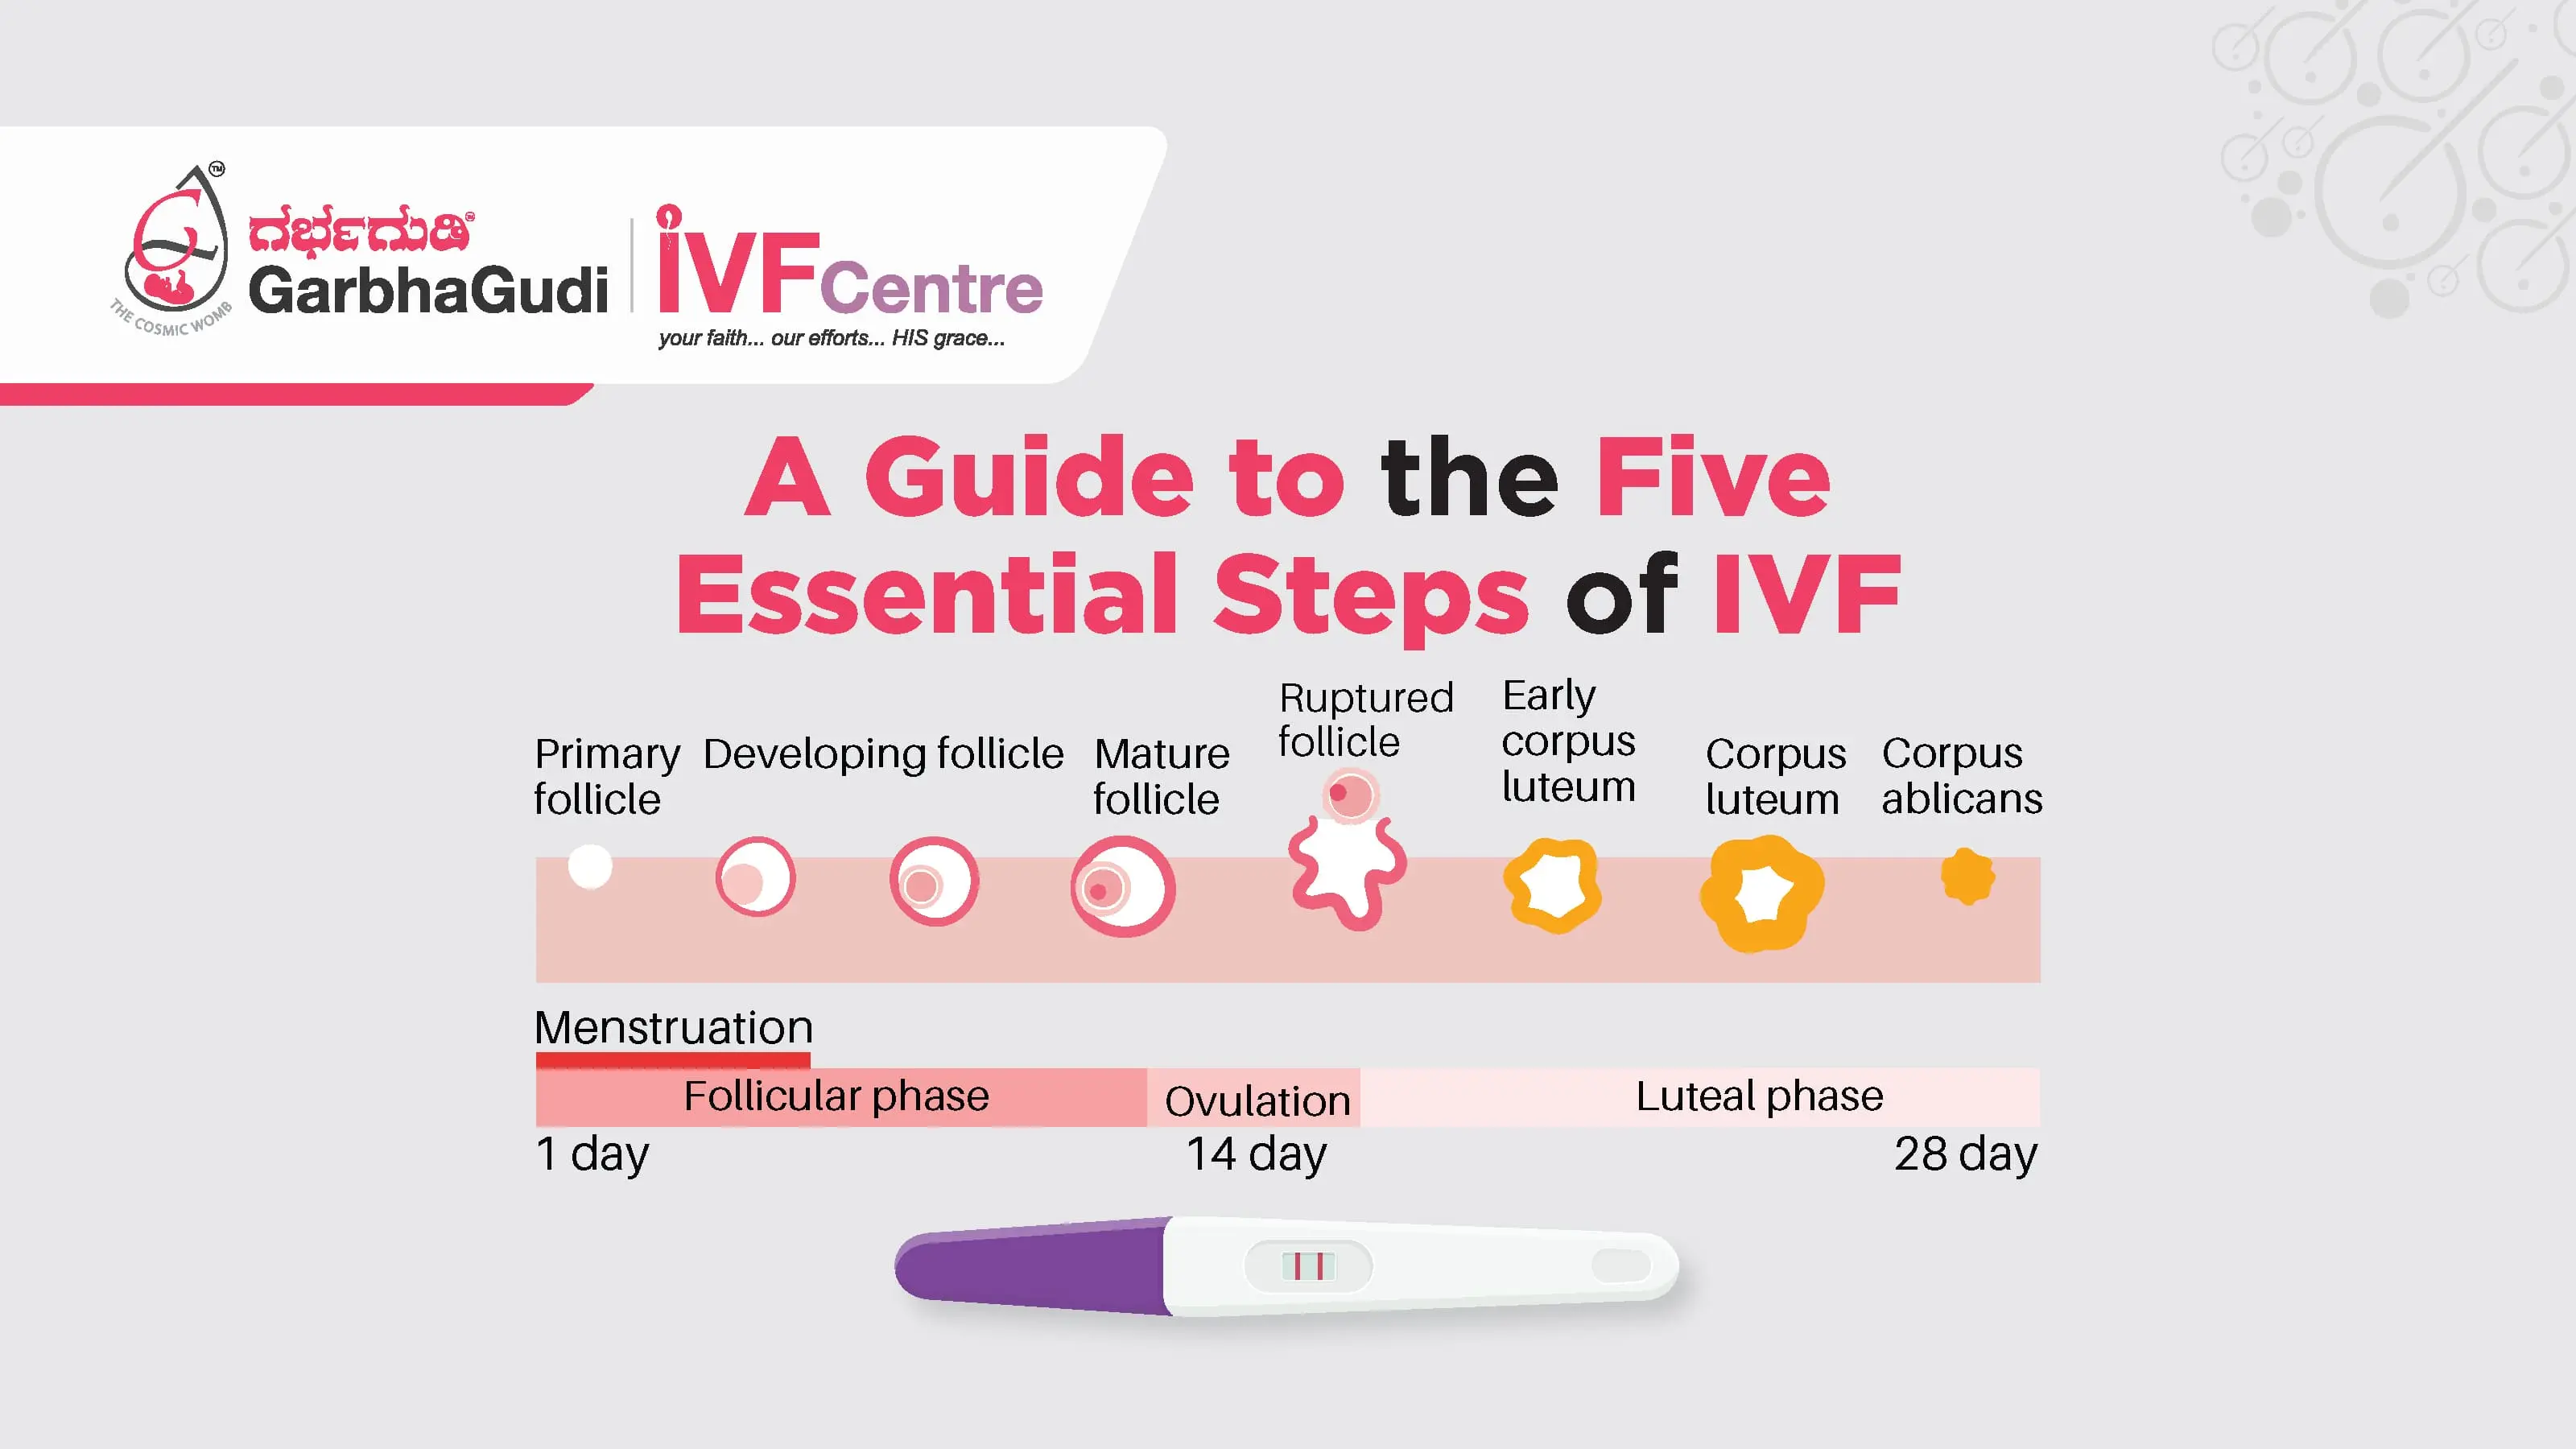 A Guide to the Five Essential Steps of IVF